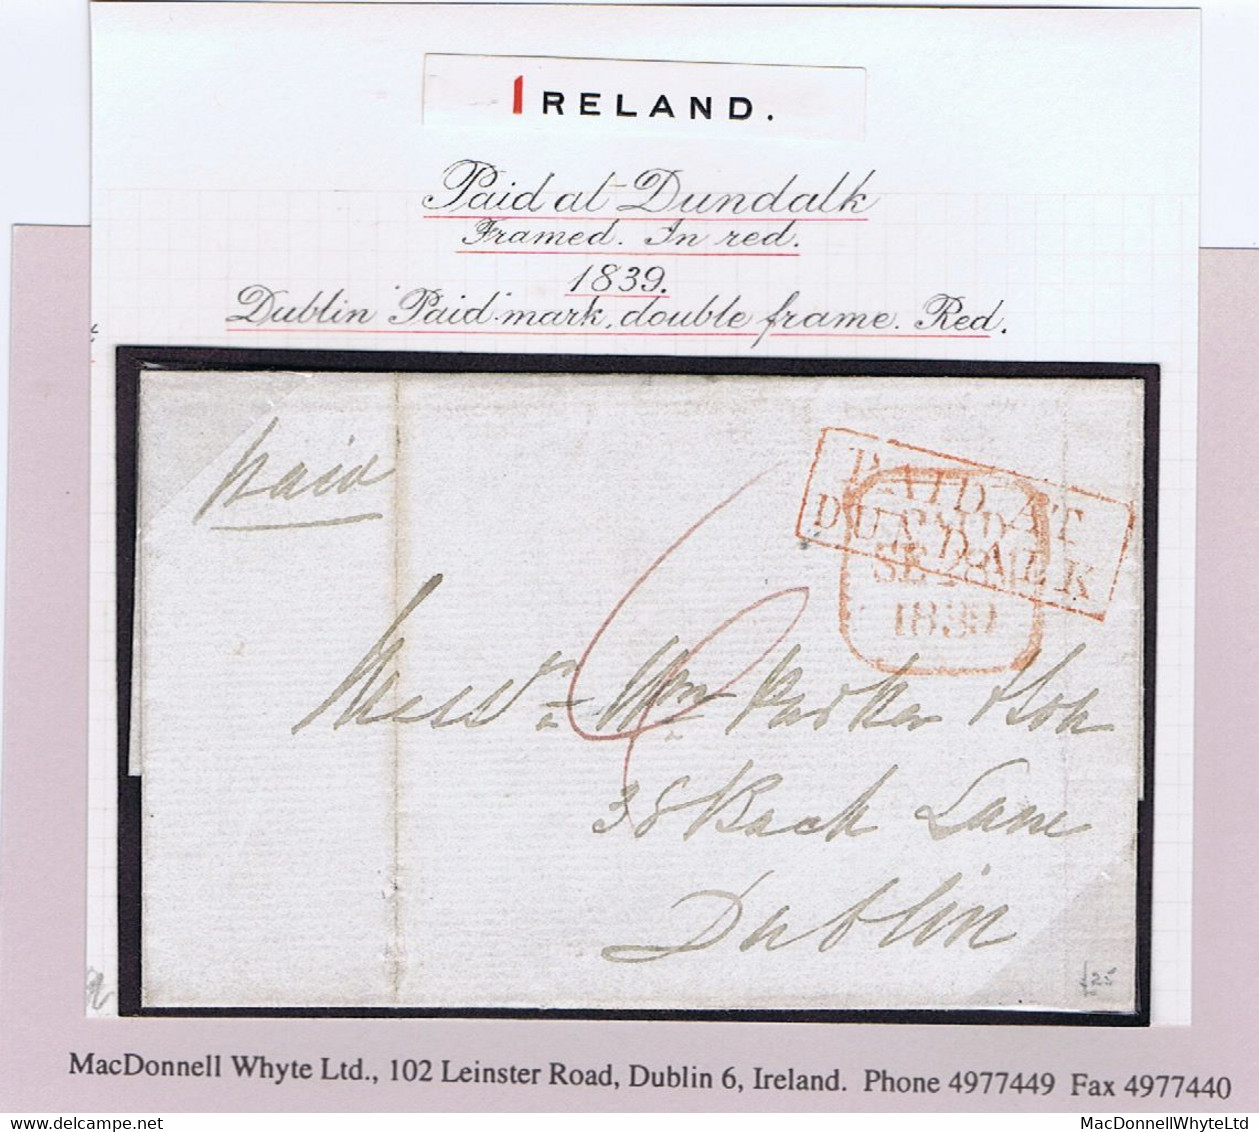 Ireland Louth 1839 Boxed 2-line PAID AT DUNDALK In Red On Cover To Dublin Prepaid Single "6" Sixpence 35 To 45 Miles - Préphilatélie